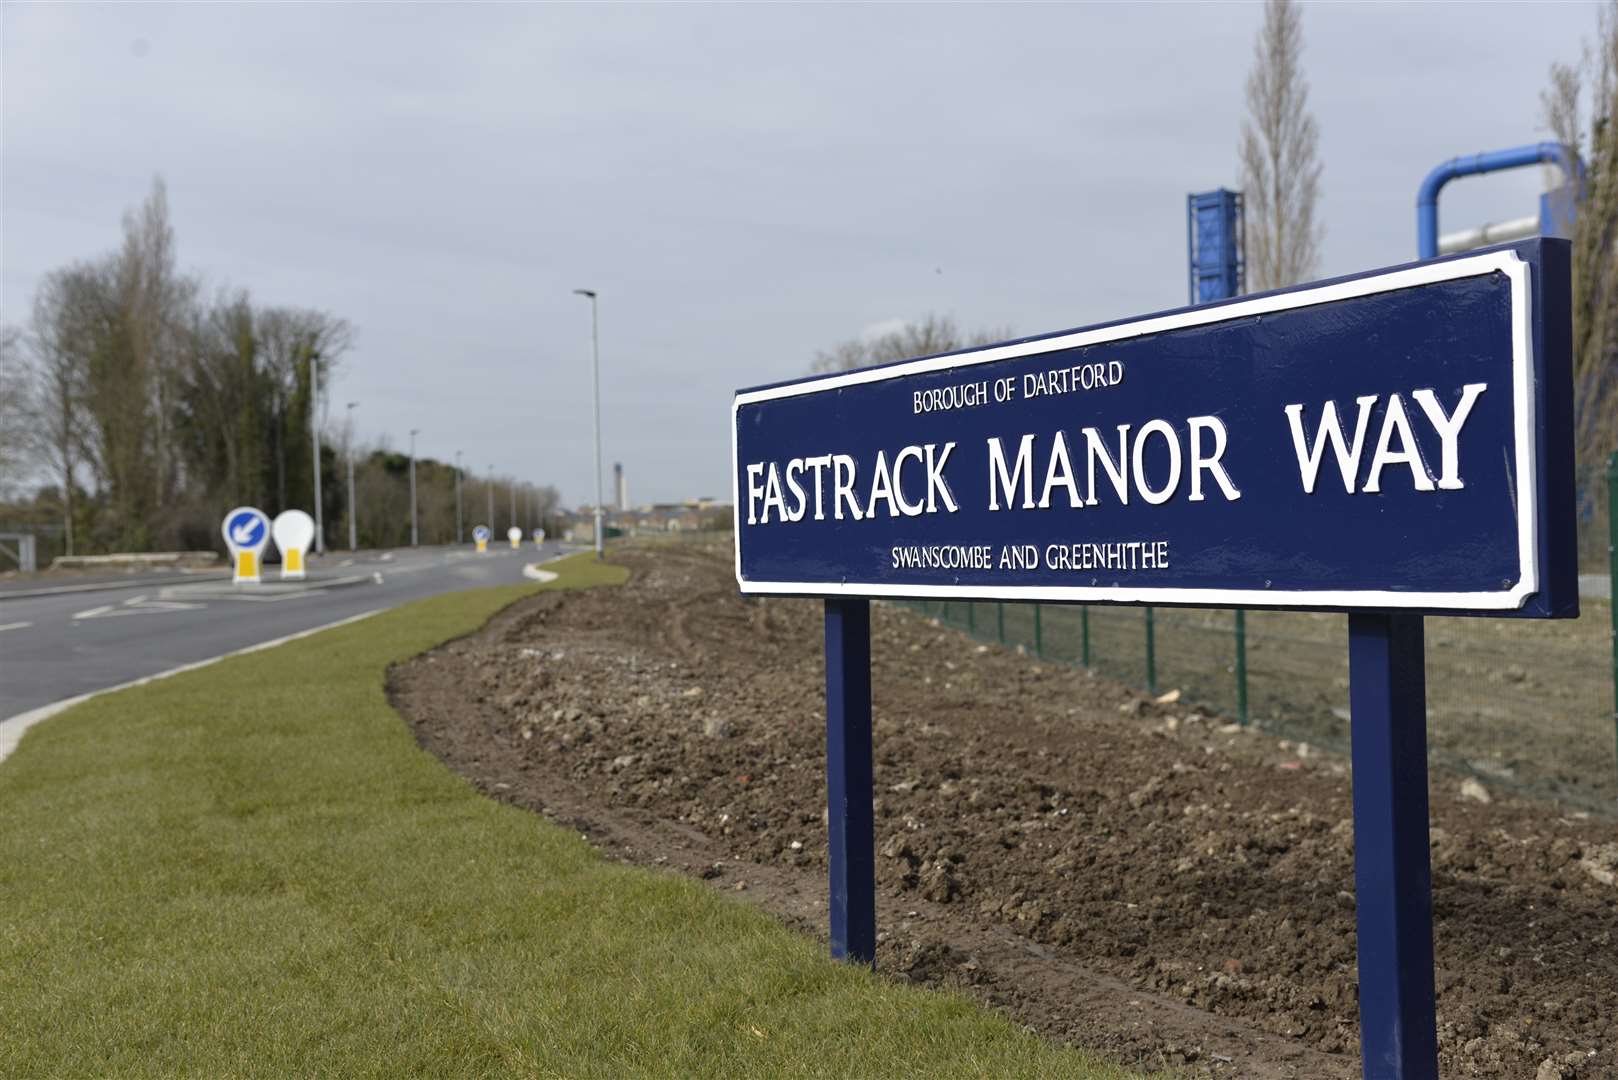 Fastrack Manor Way will now be known as Tiltman Avenue.